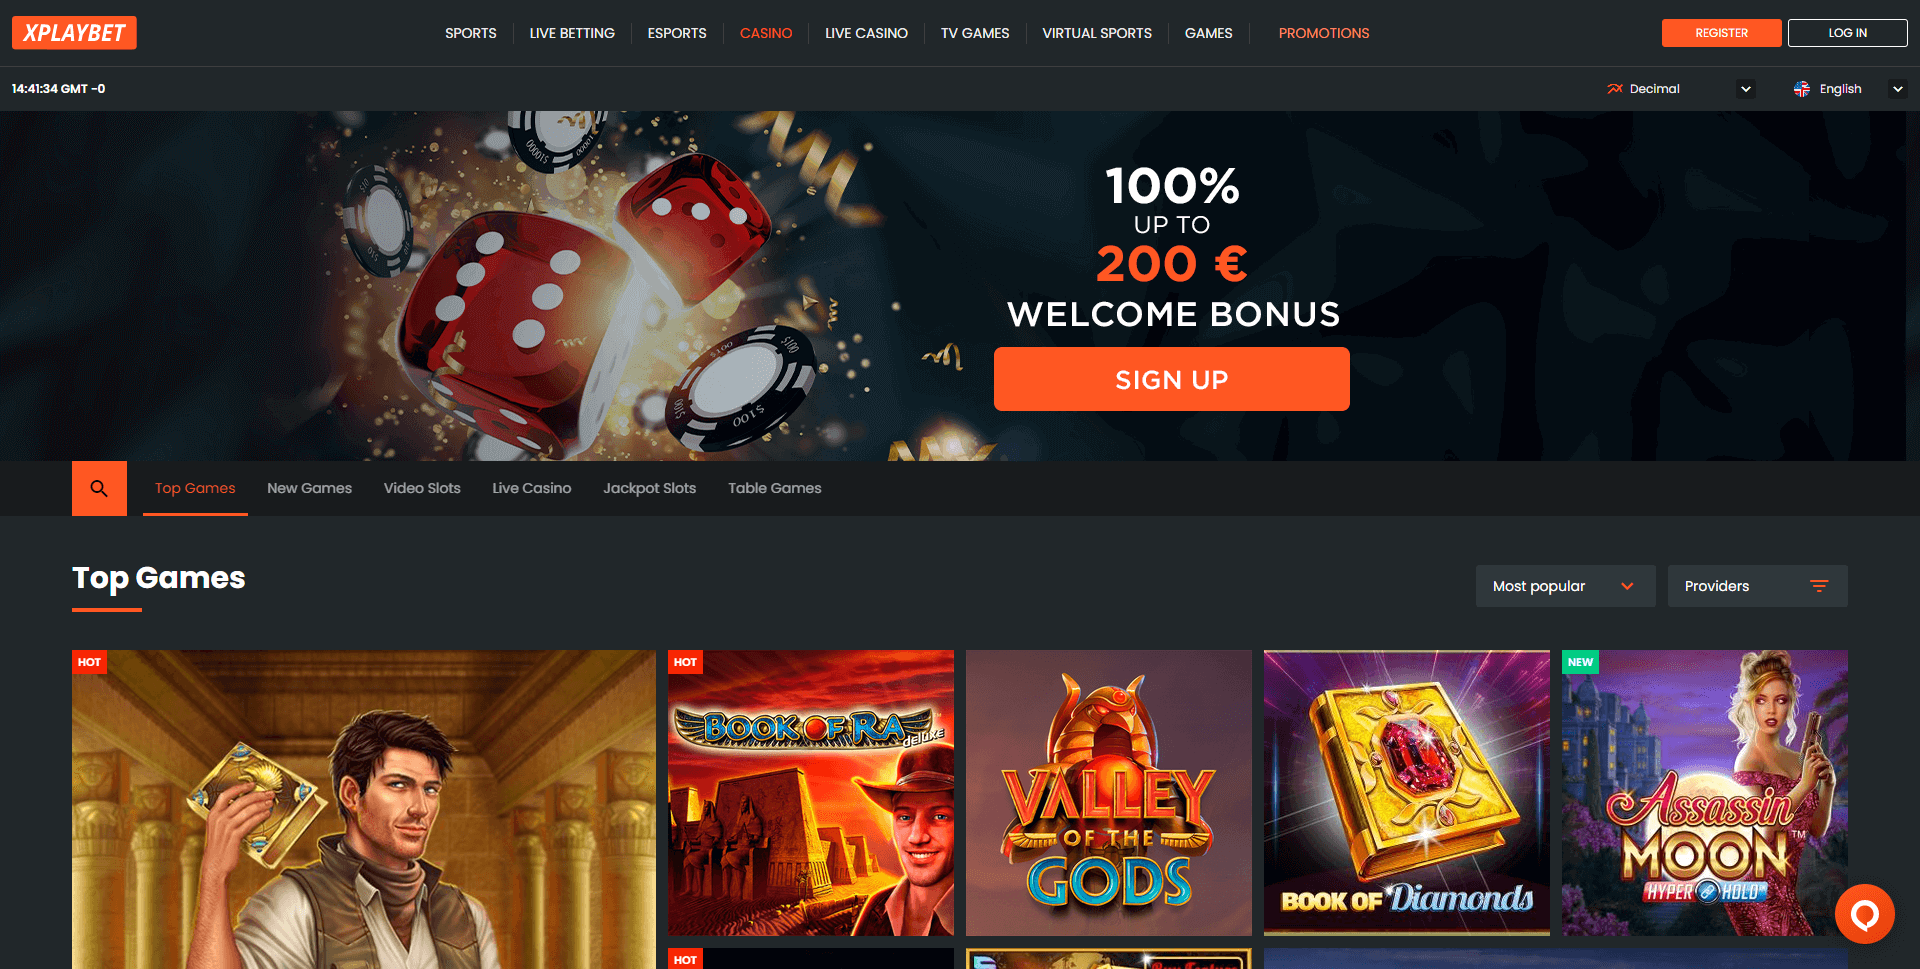 XplayBet Casino Review